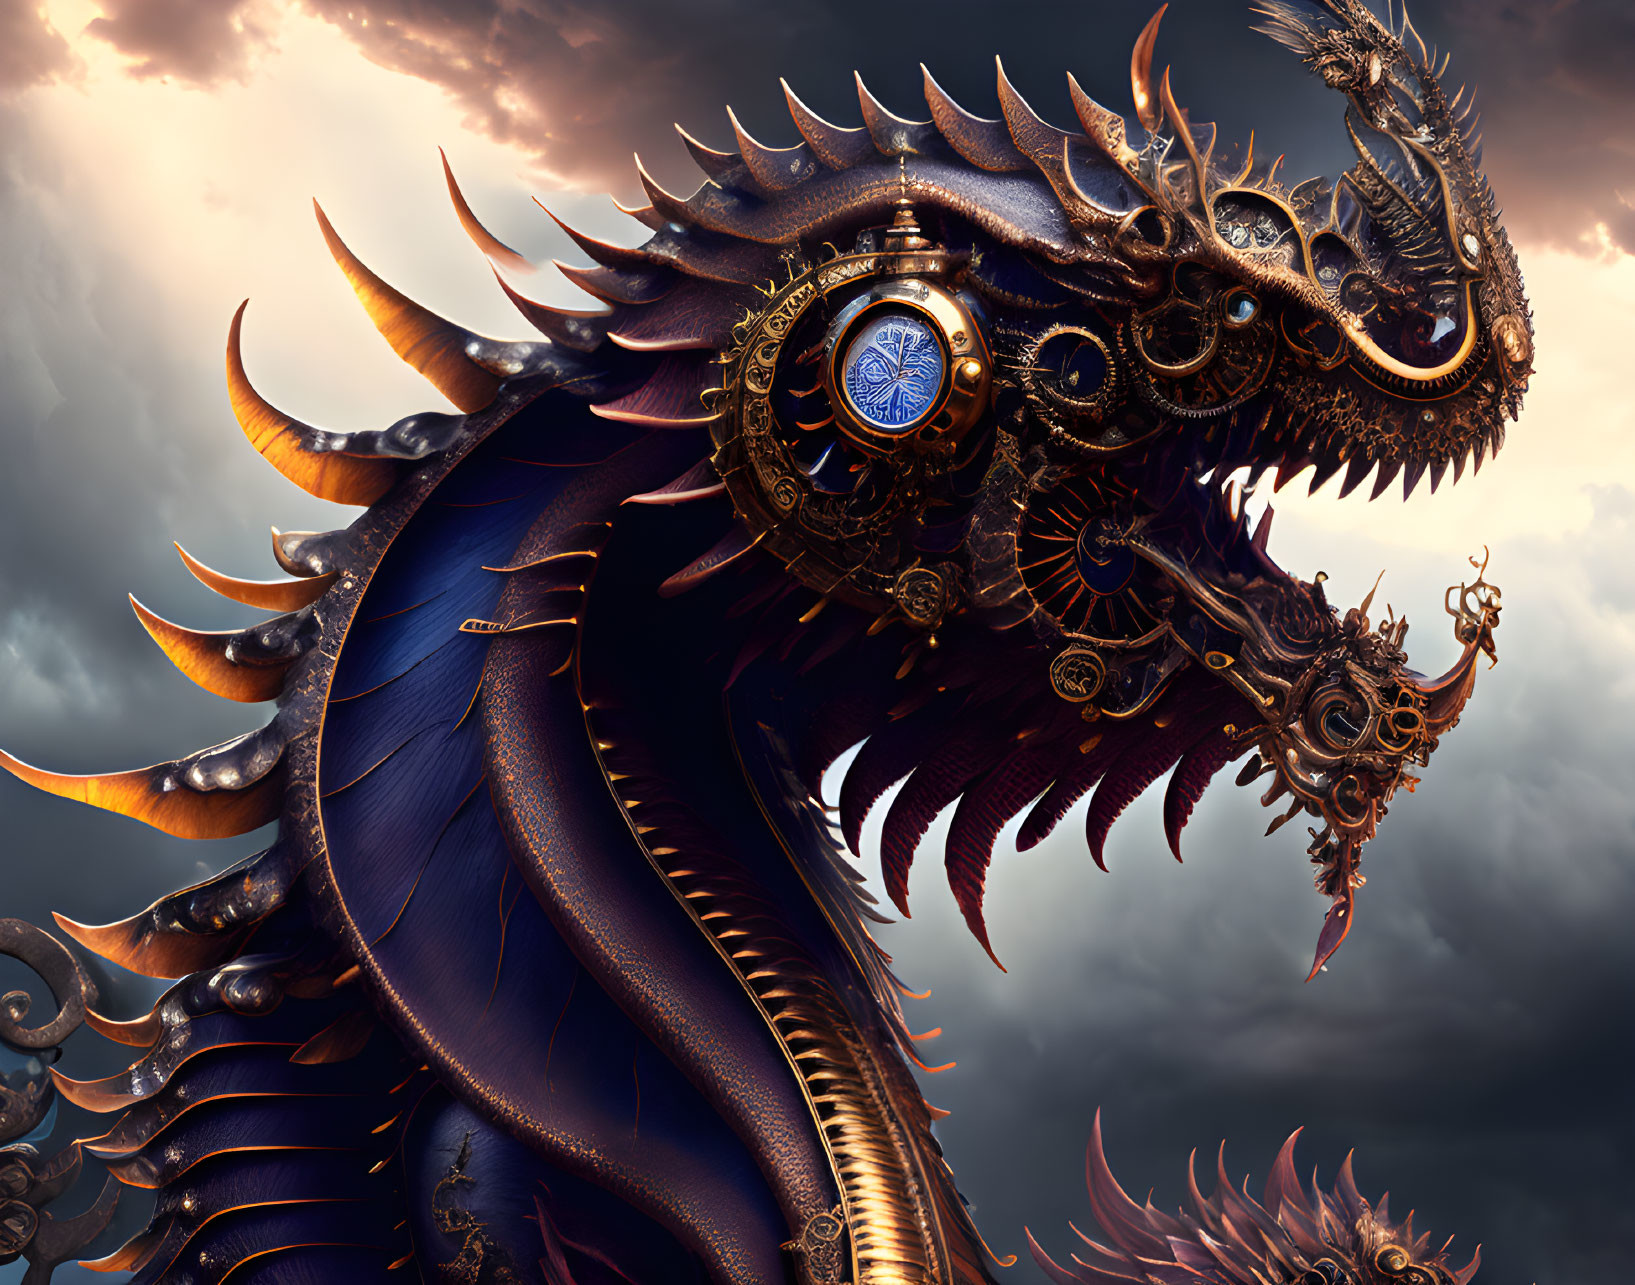 Detailed Mechanical Dragon Against Stormy Sky with Gears and Cogs